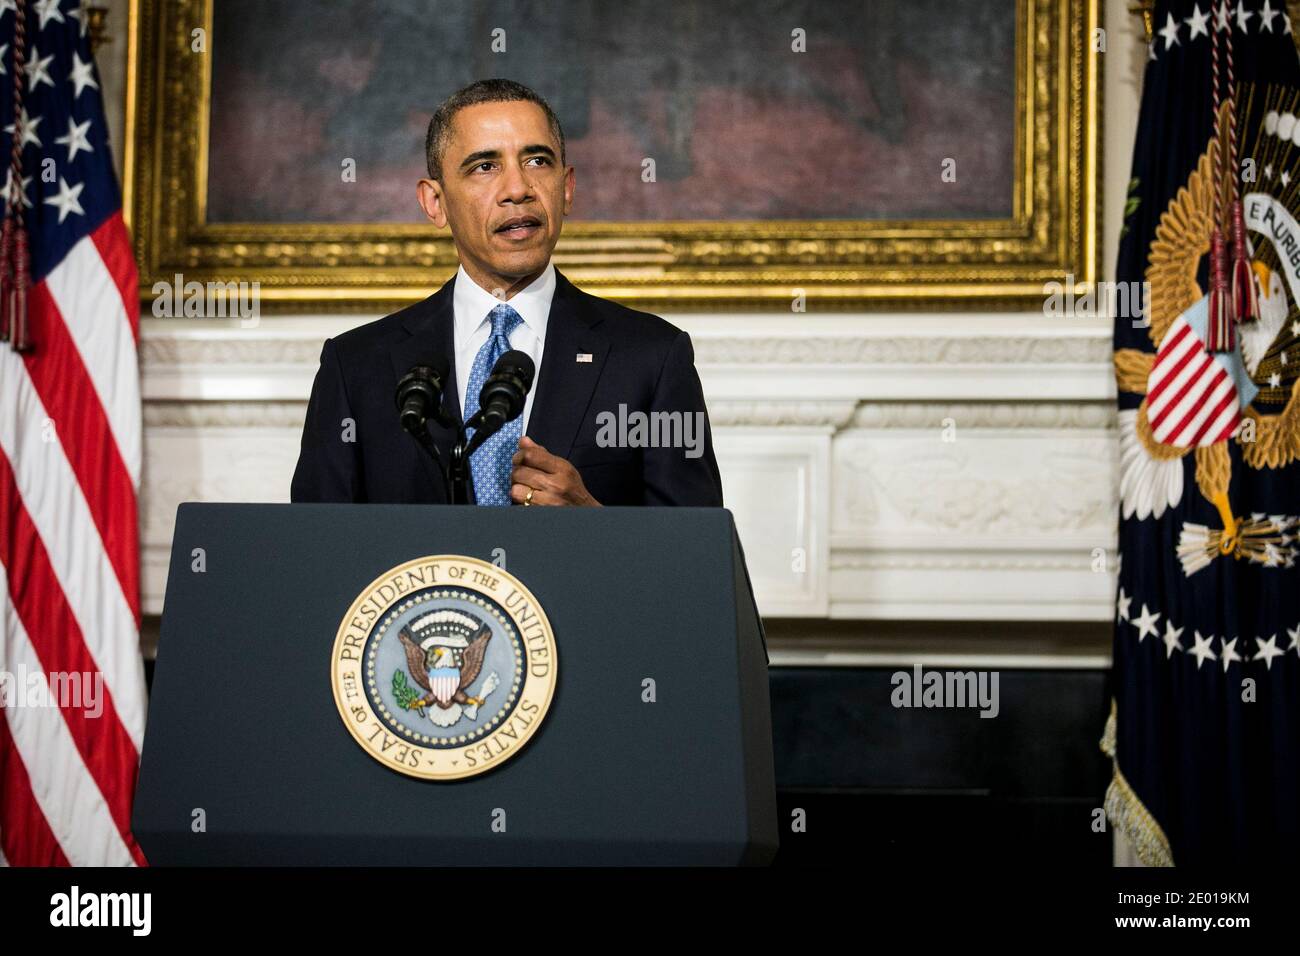 President Barack Obama makes a statement announcing an interim agreement on Iranian nuclear power that was reached in negotiations between Iran and six world powers, from the State Dining Room at the White House on Nov. 23, 2013 in Washington, DC, USA. A major sticking point in the negotiations has been Iran's insistence on it's right to enrich uranium. Photo by T.J. Kirkpatrick/Pool/ABACAPRESS.COM Stock Photo